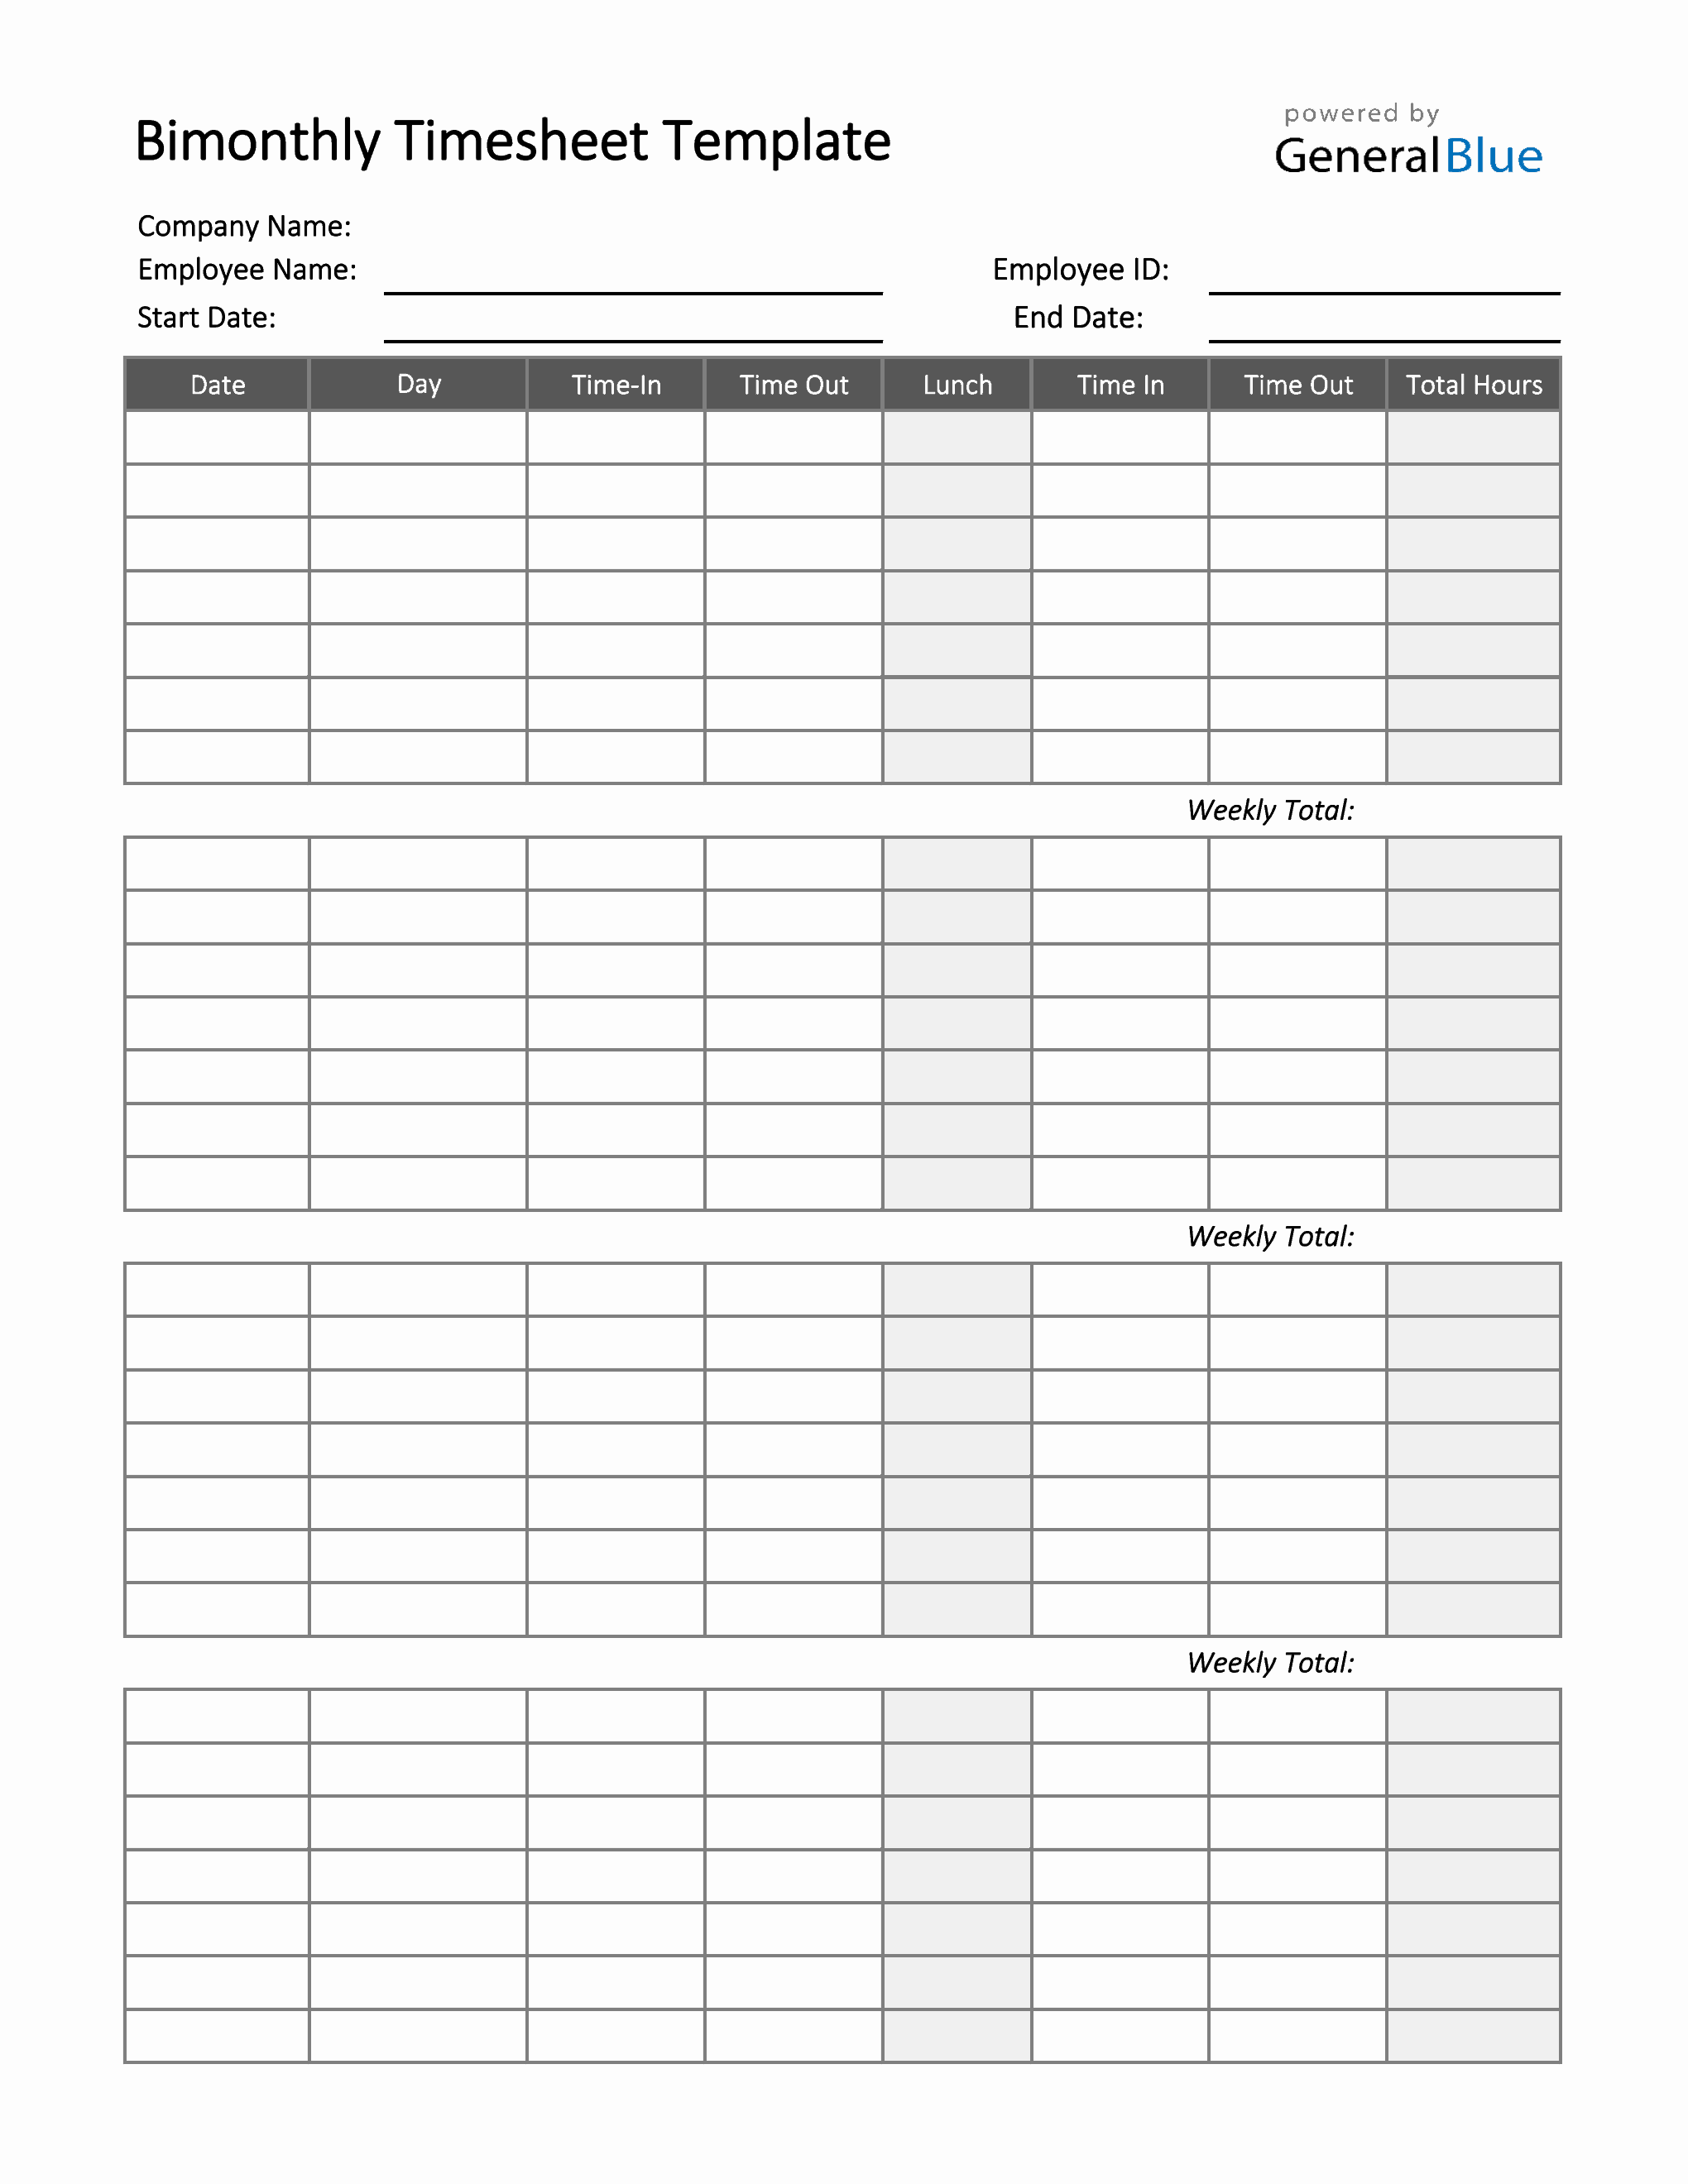 excel-timesheet-template-bi-weekly-lalapatheater